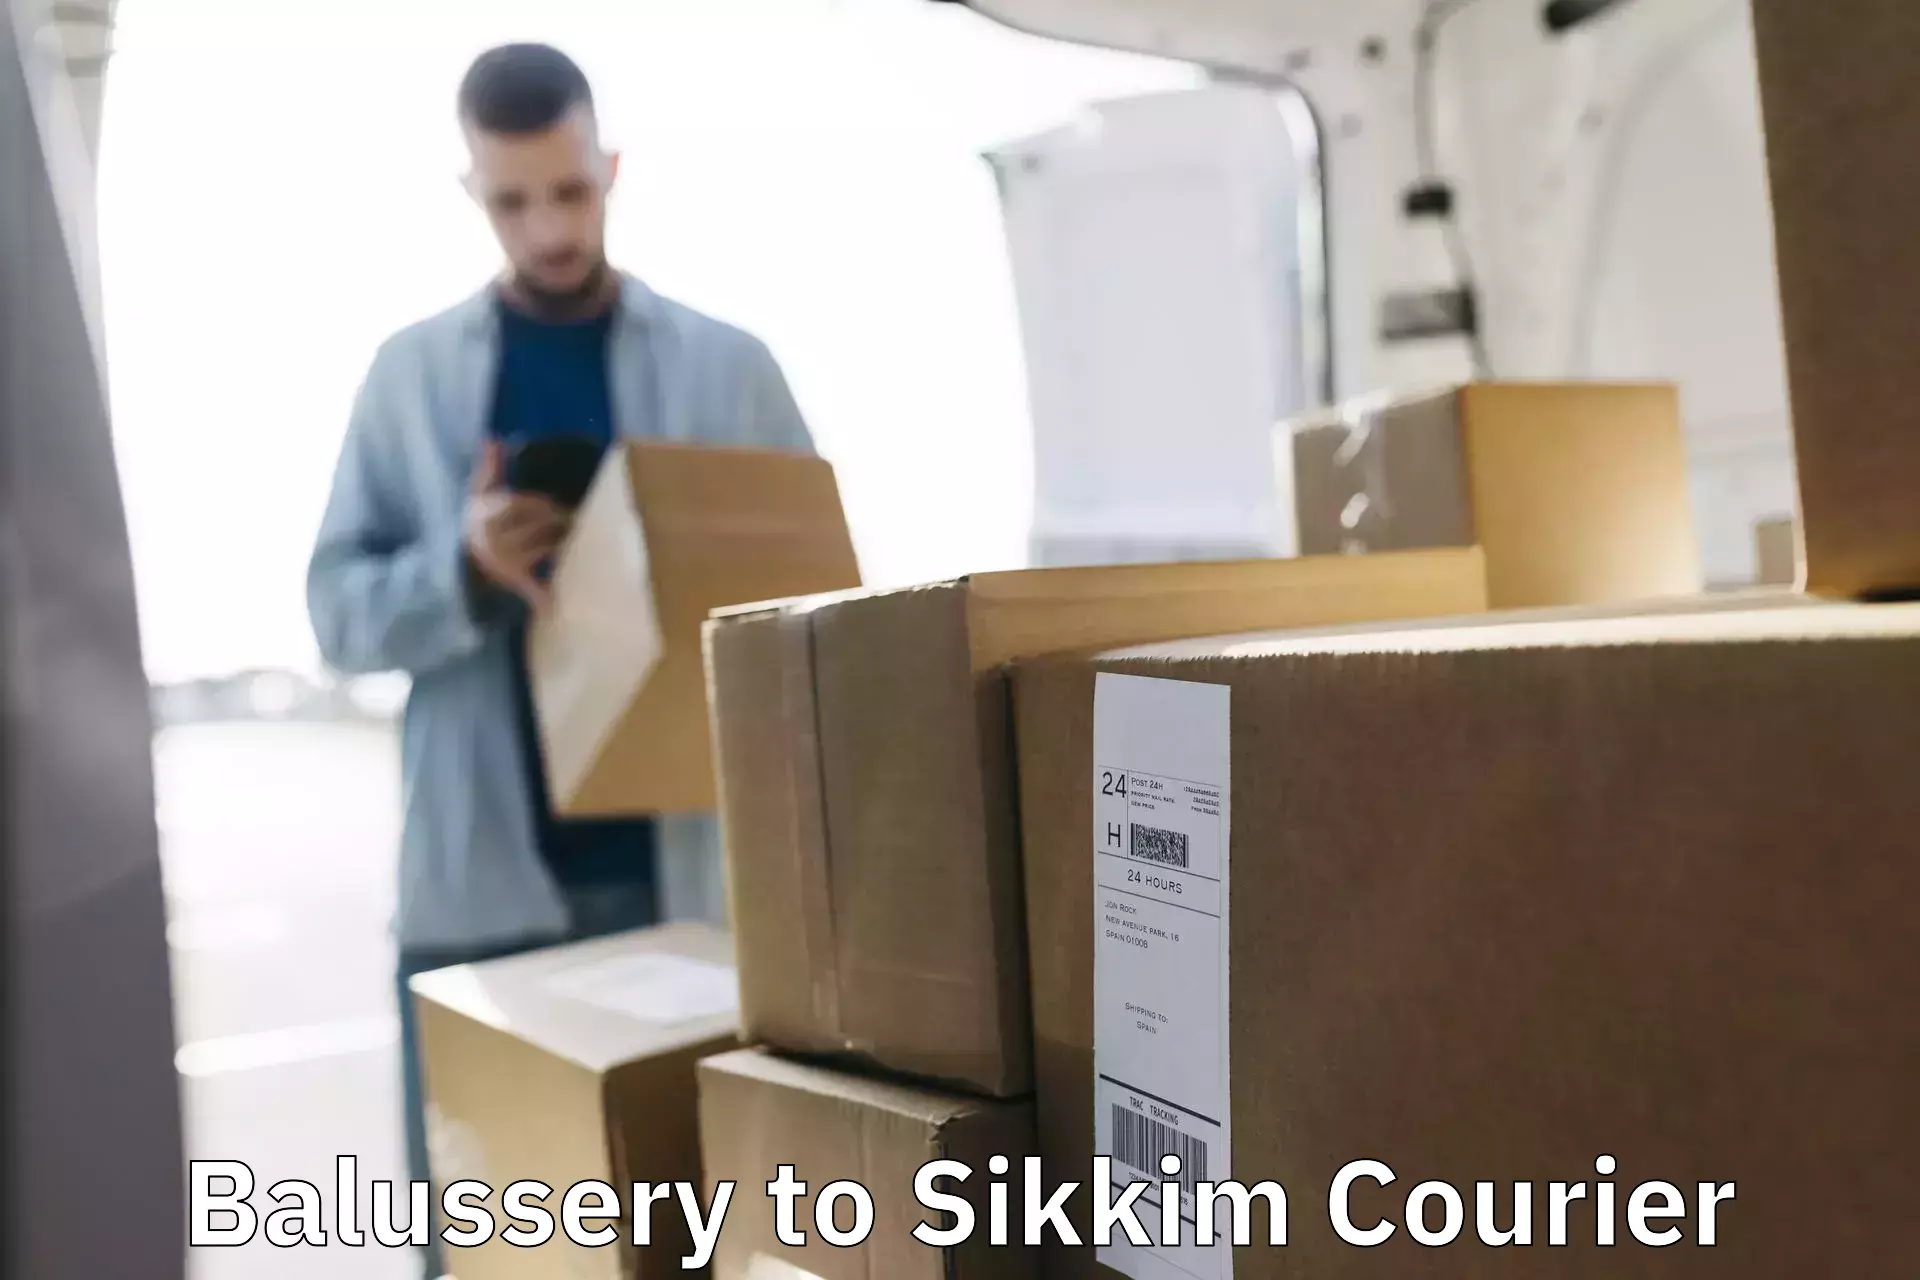 Flexible delivery scheduling Balussery to Sikkim